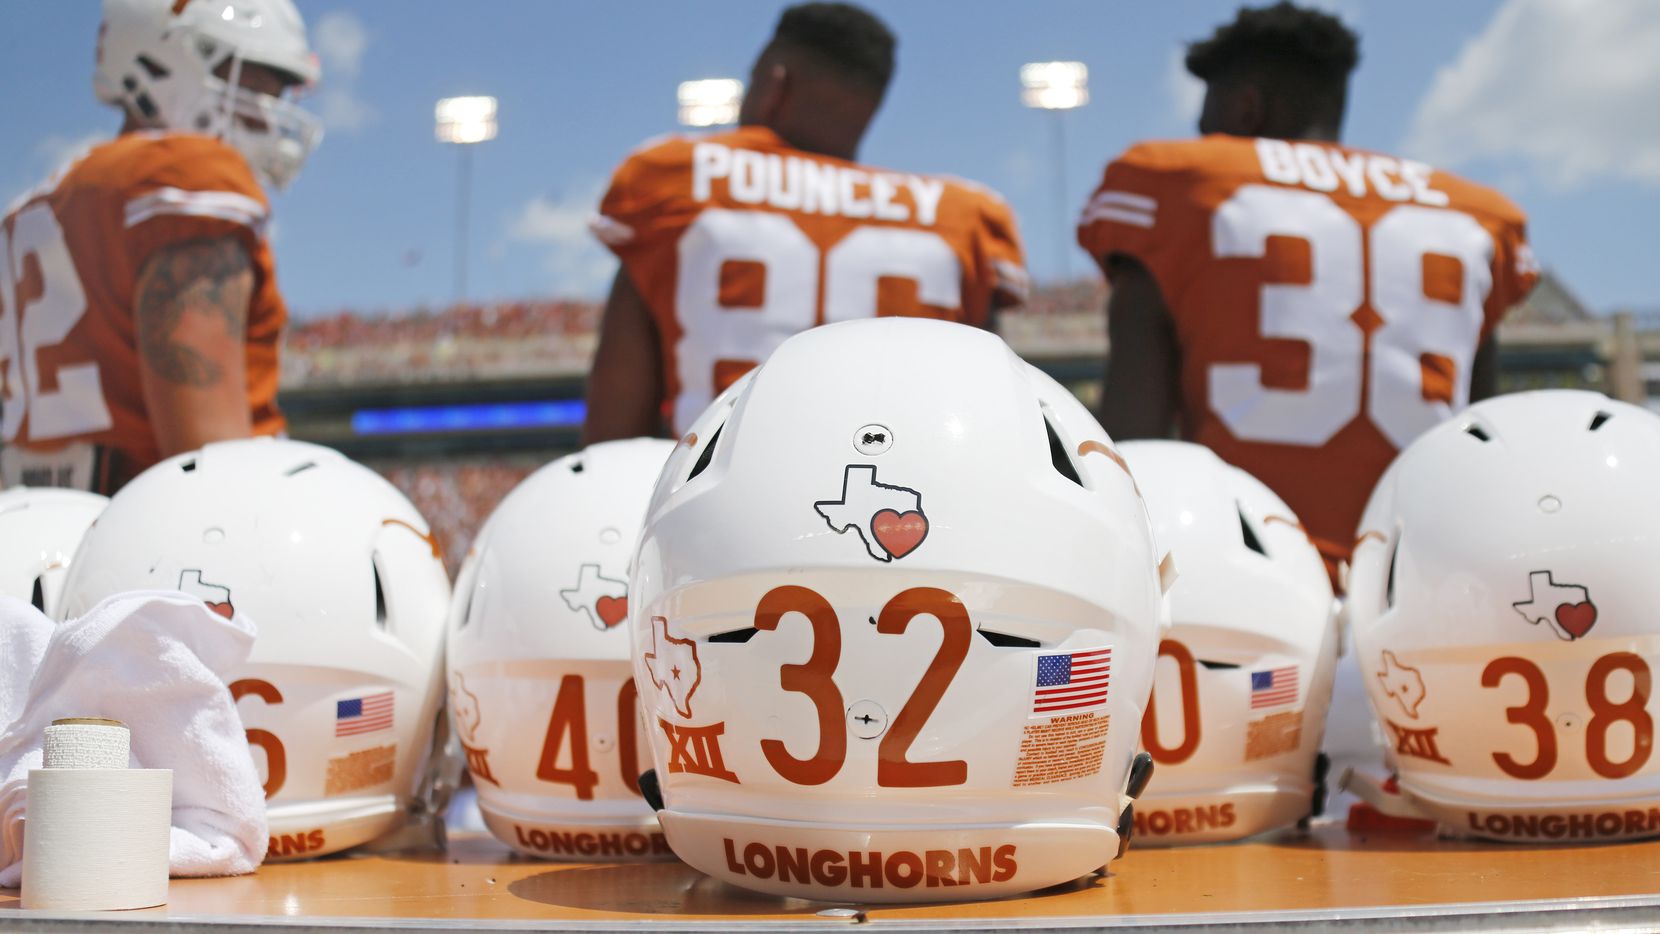 Every Texas Longhorns helmet sports a special decal showing support for the Houston area after it was damaged by flooding from Hurricane Harvey this week. Photographed during the University of Maryland Terrapins vs. the University of Texas Longhorns NCAA football game at Darrell K Royal Texas Memorial Stadium in Austin, Texas on Saturday, September 2, 2017. (Louis DeLuca/The Dallas Morning News)